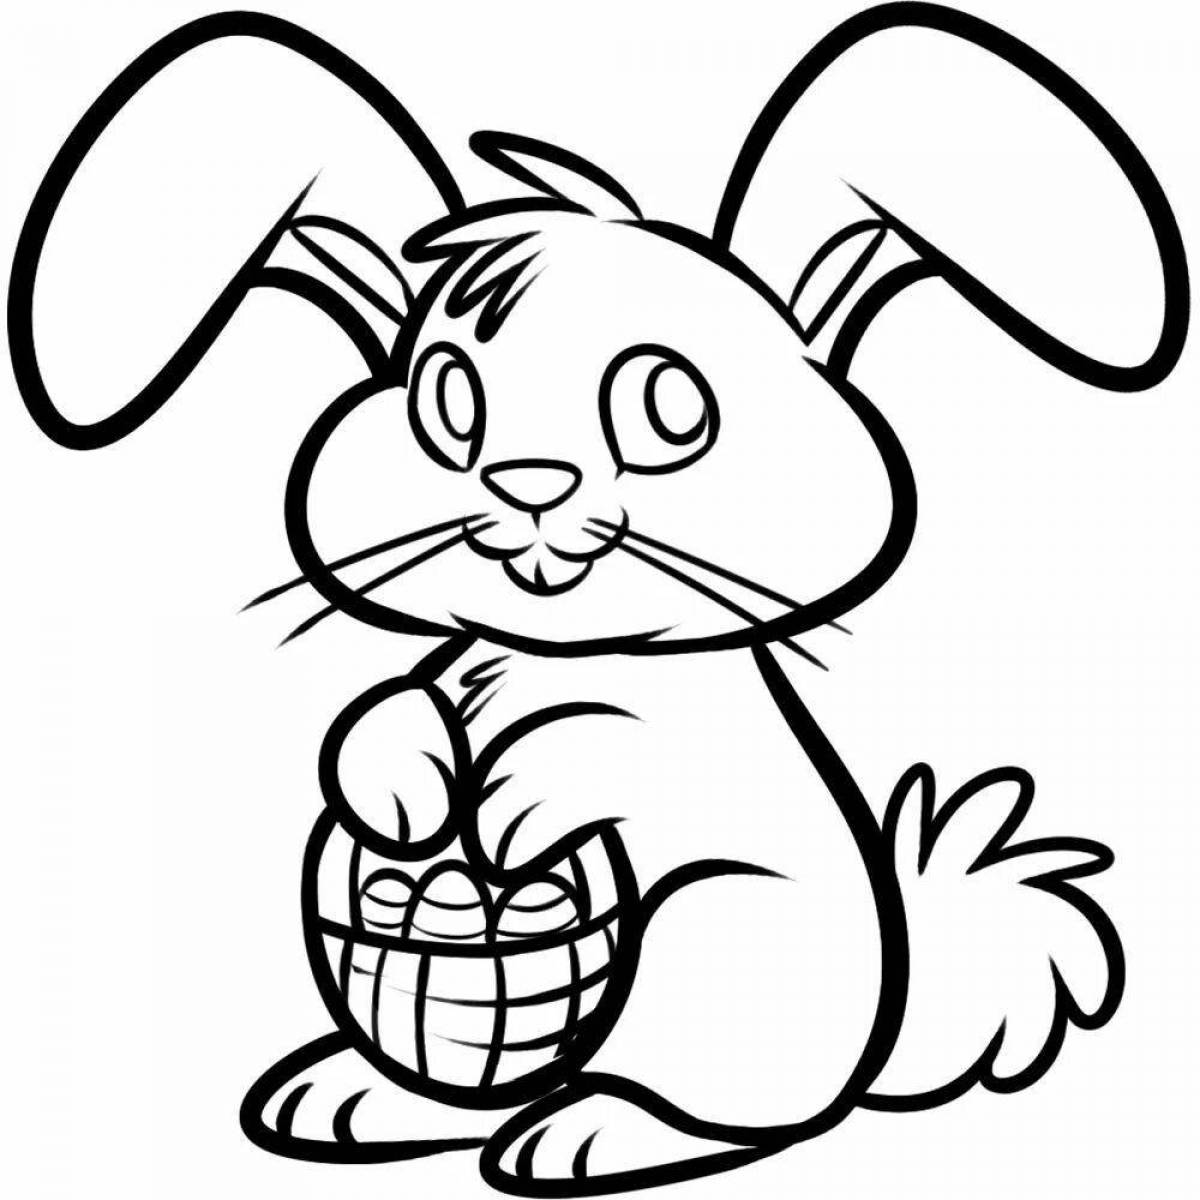 Loving rabbit and cat coloring page